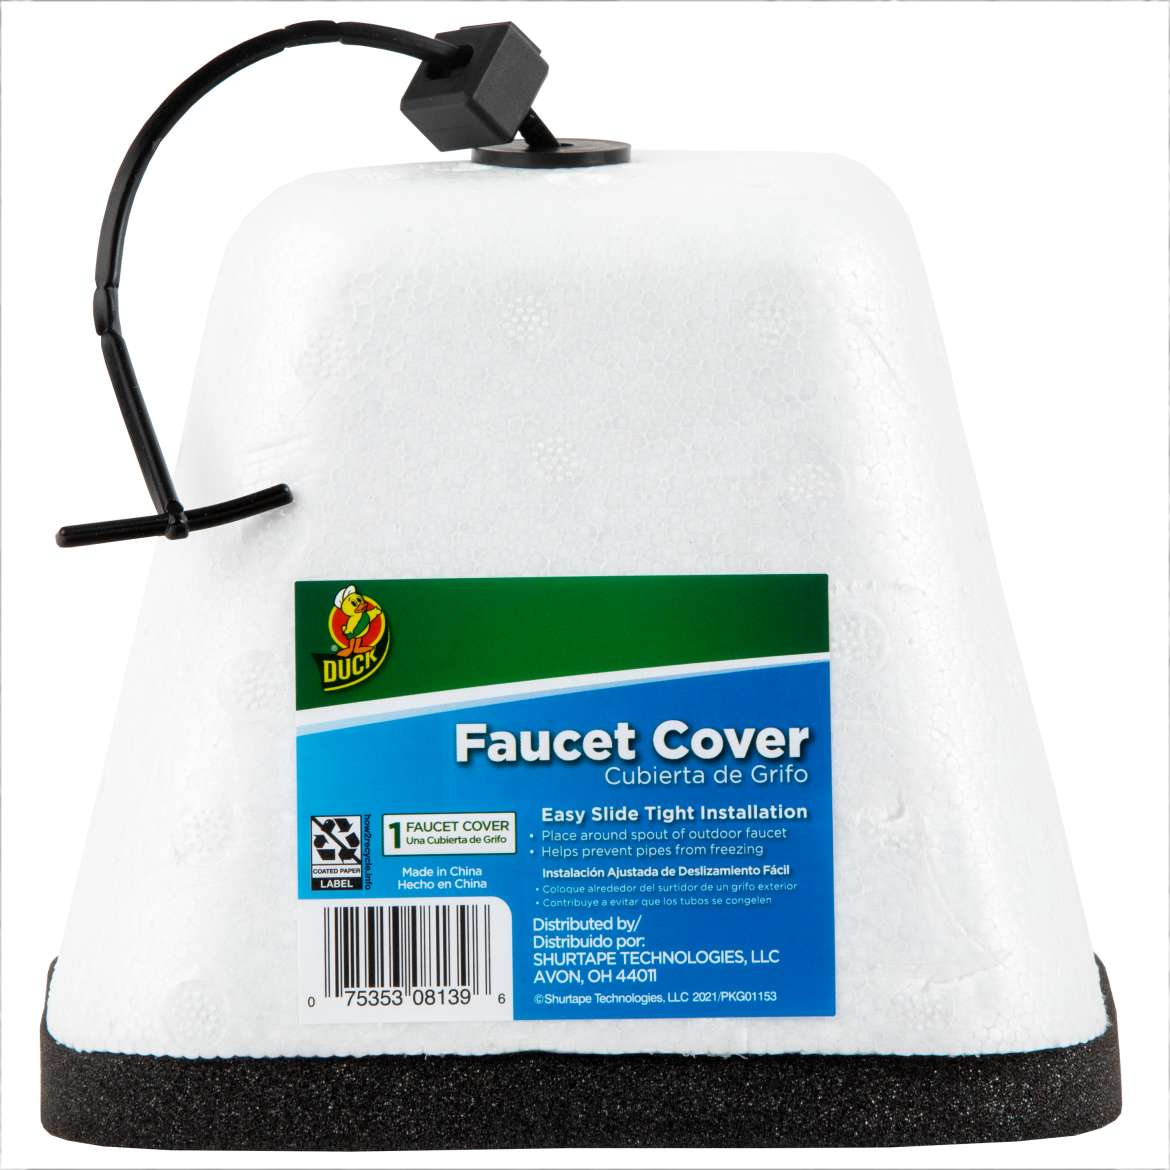 Hard Cover Faucet Cover Image